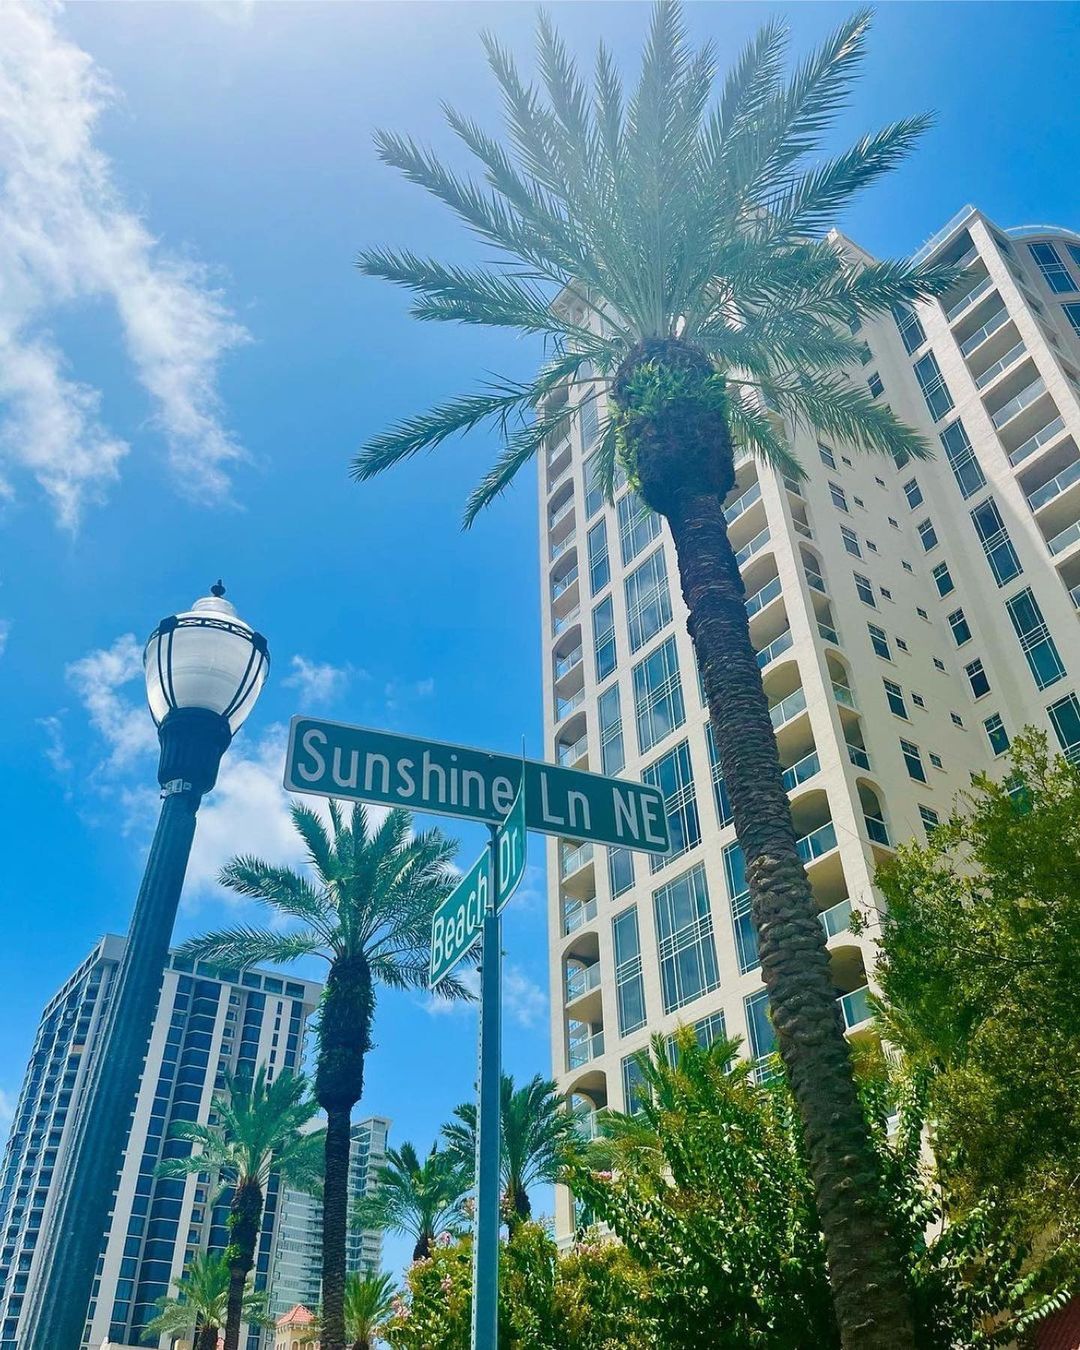 View from Below of St. Petersburg's Sunshine Lane. Photo by Instagram user @stpetechamber